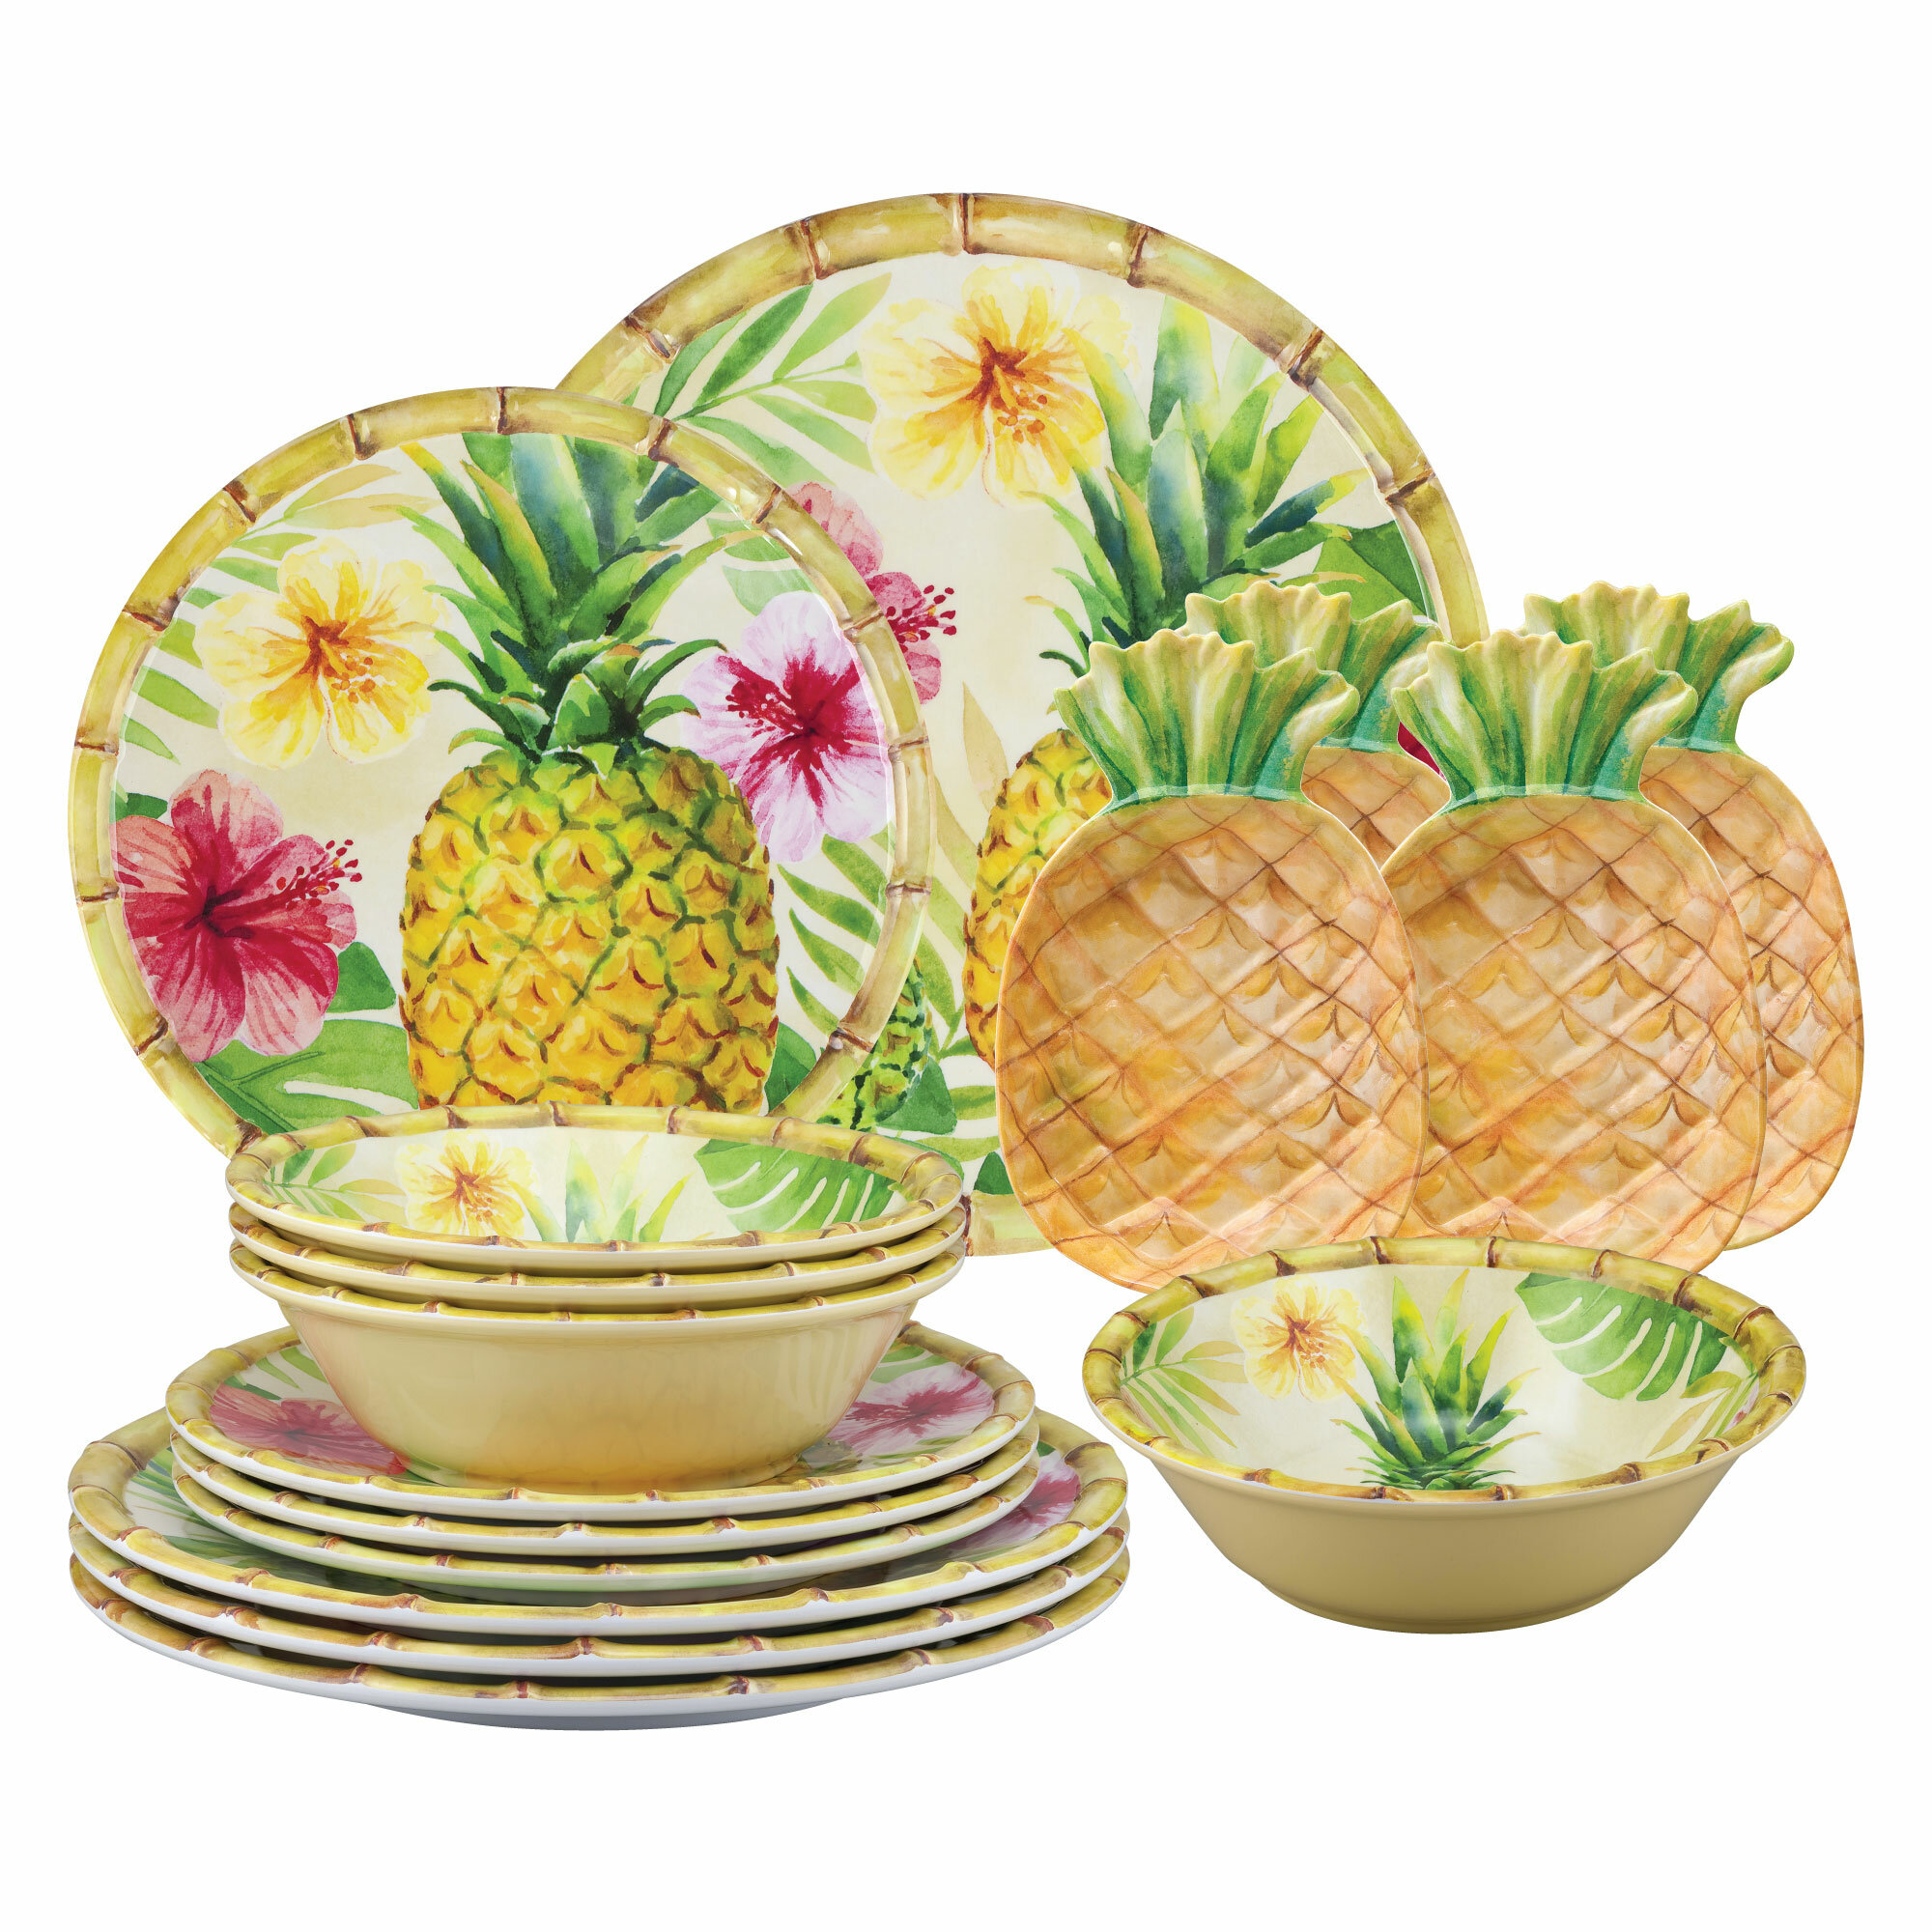 Details about   x6 Nautica Pineapple Melamine Dinner Plate Set Teal Tropical Palm Leaves Bamboo 